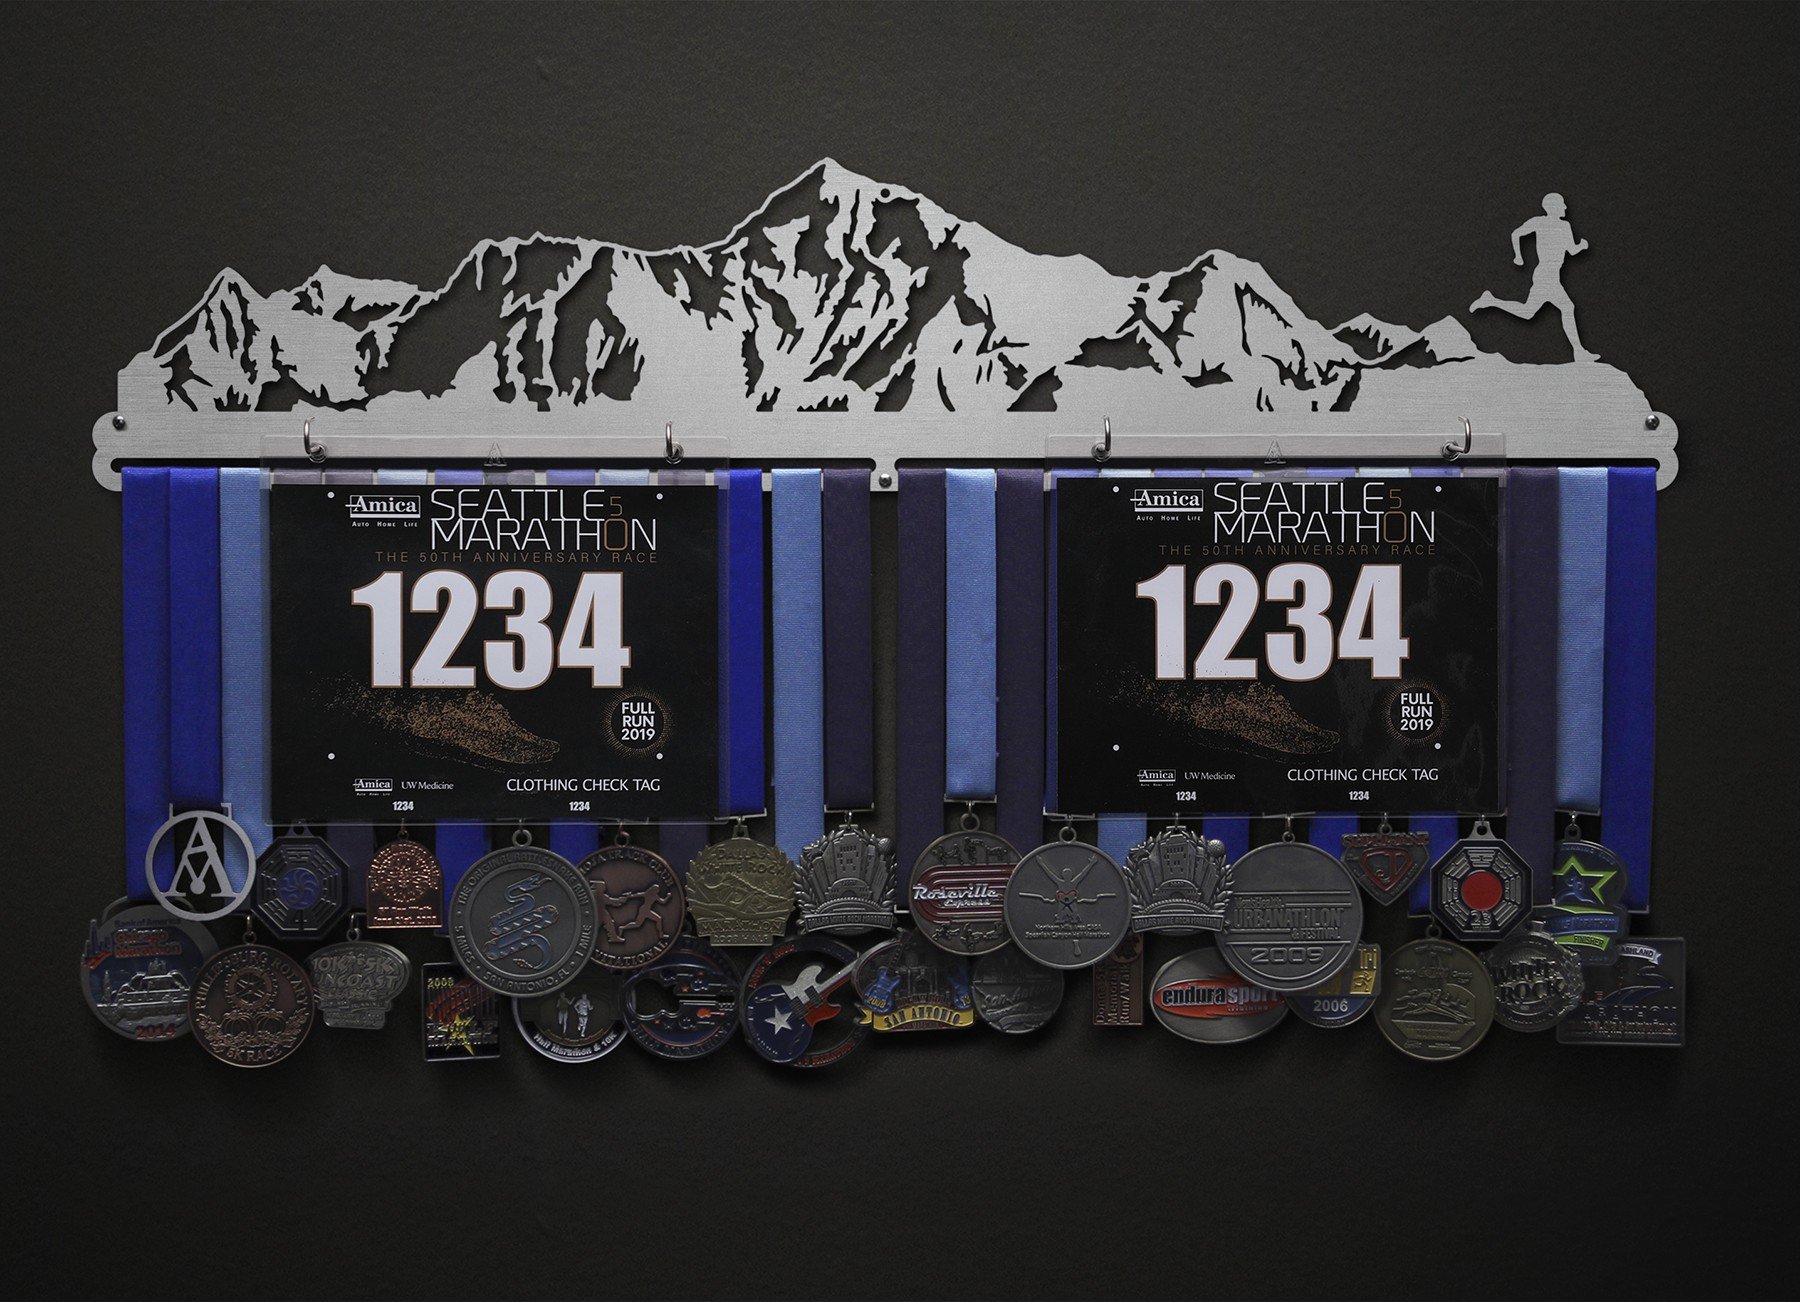 Mountainscape - Male - Version 2 Bib and Medal Display